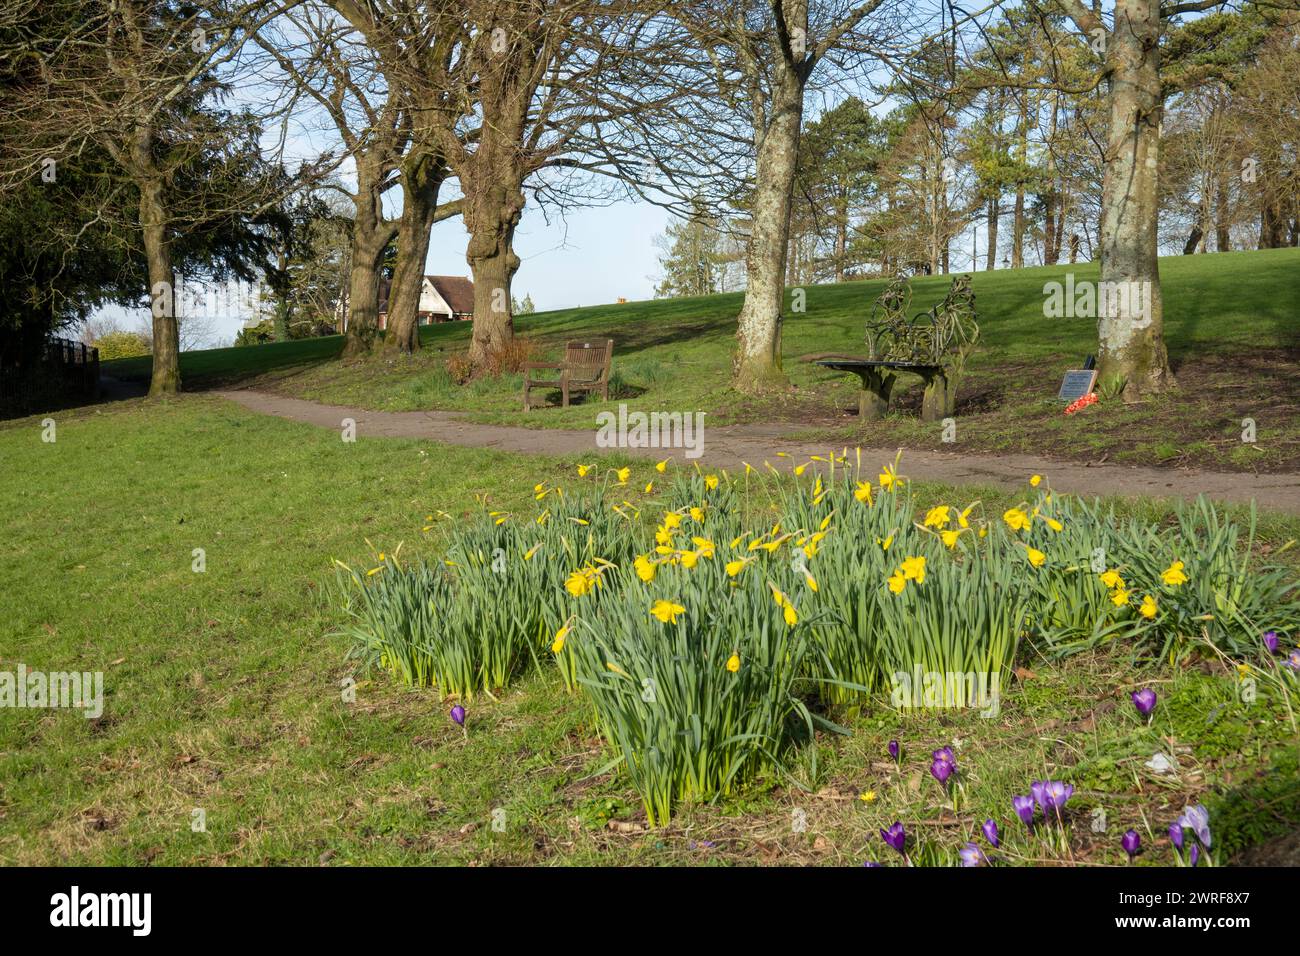 Spring daffodils wild flowers in park on St Giles Hill, Winchester, Hampshire, England, United Kingdom, Europe Stock Photo